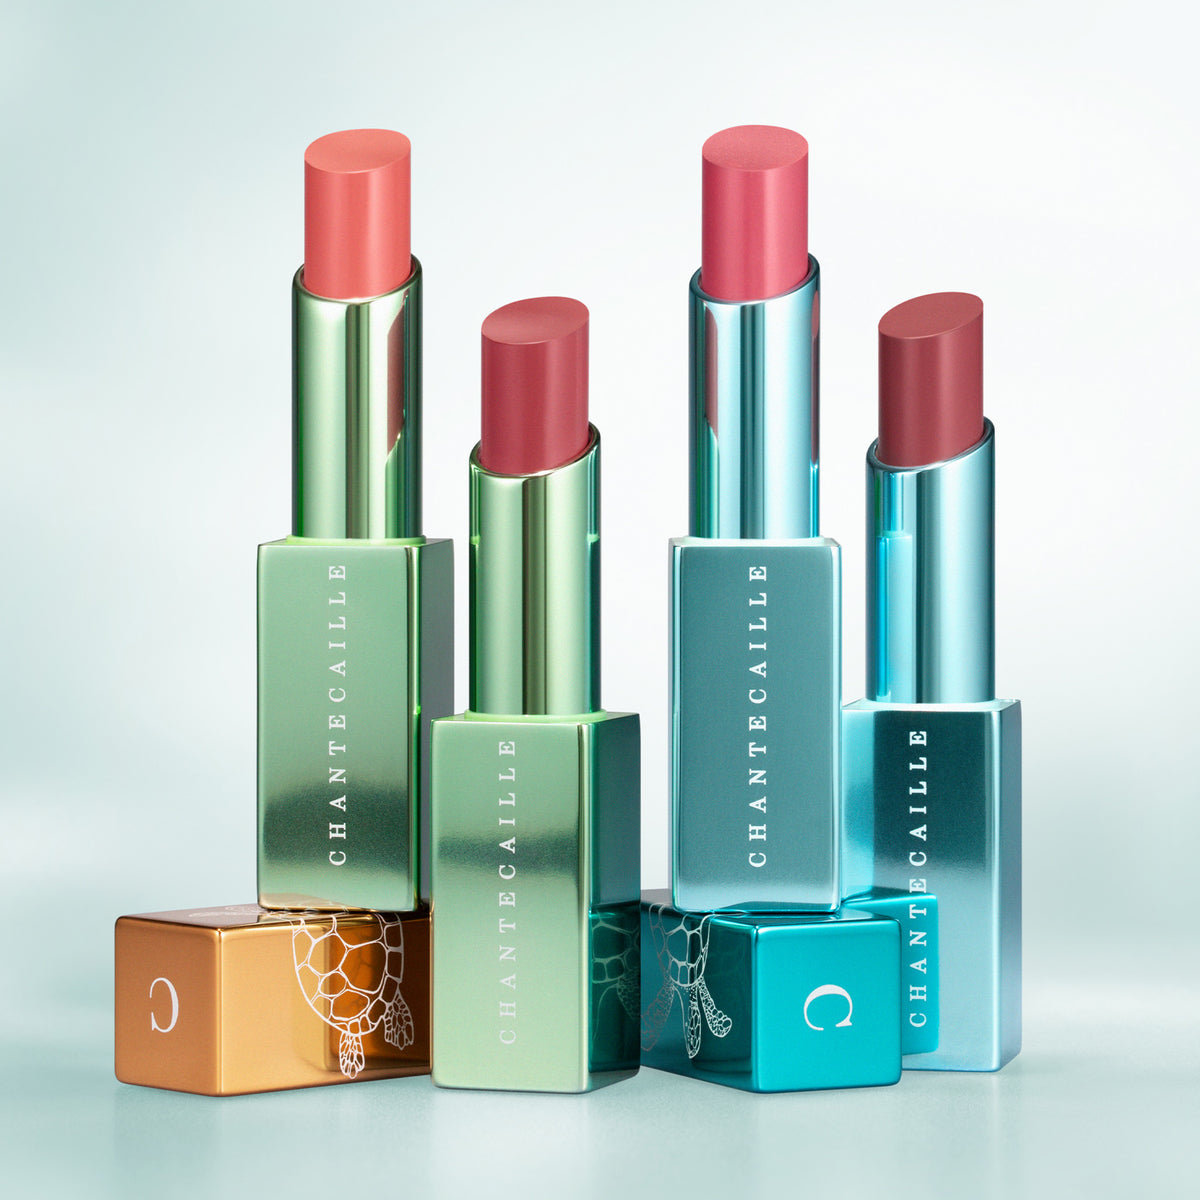 Chantecaille Sea Turtle Collection Lip Chic (Limited Edition) . This product is in the color coral